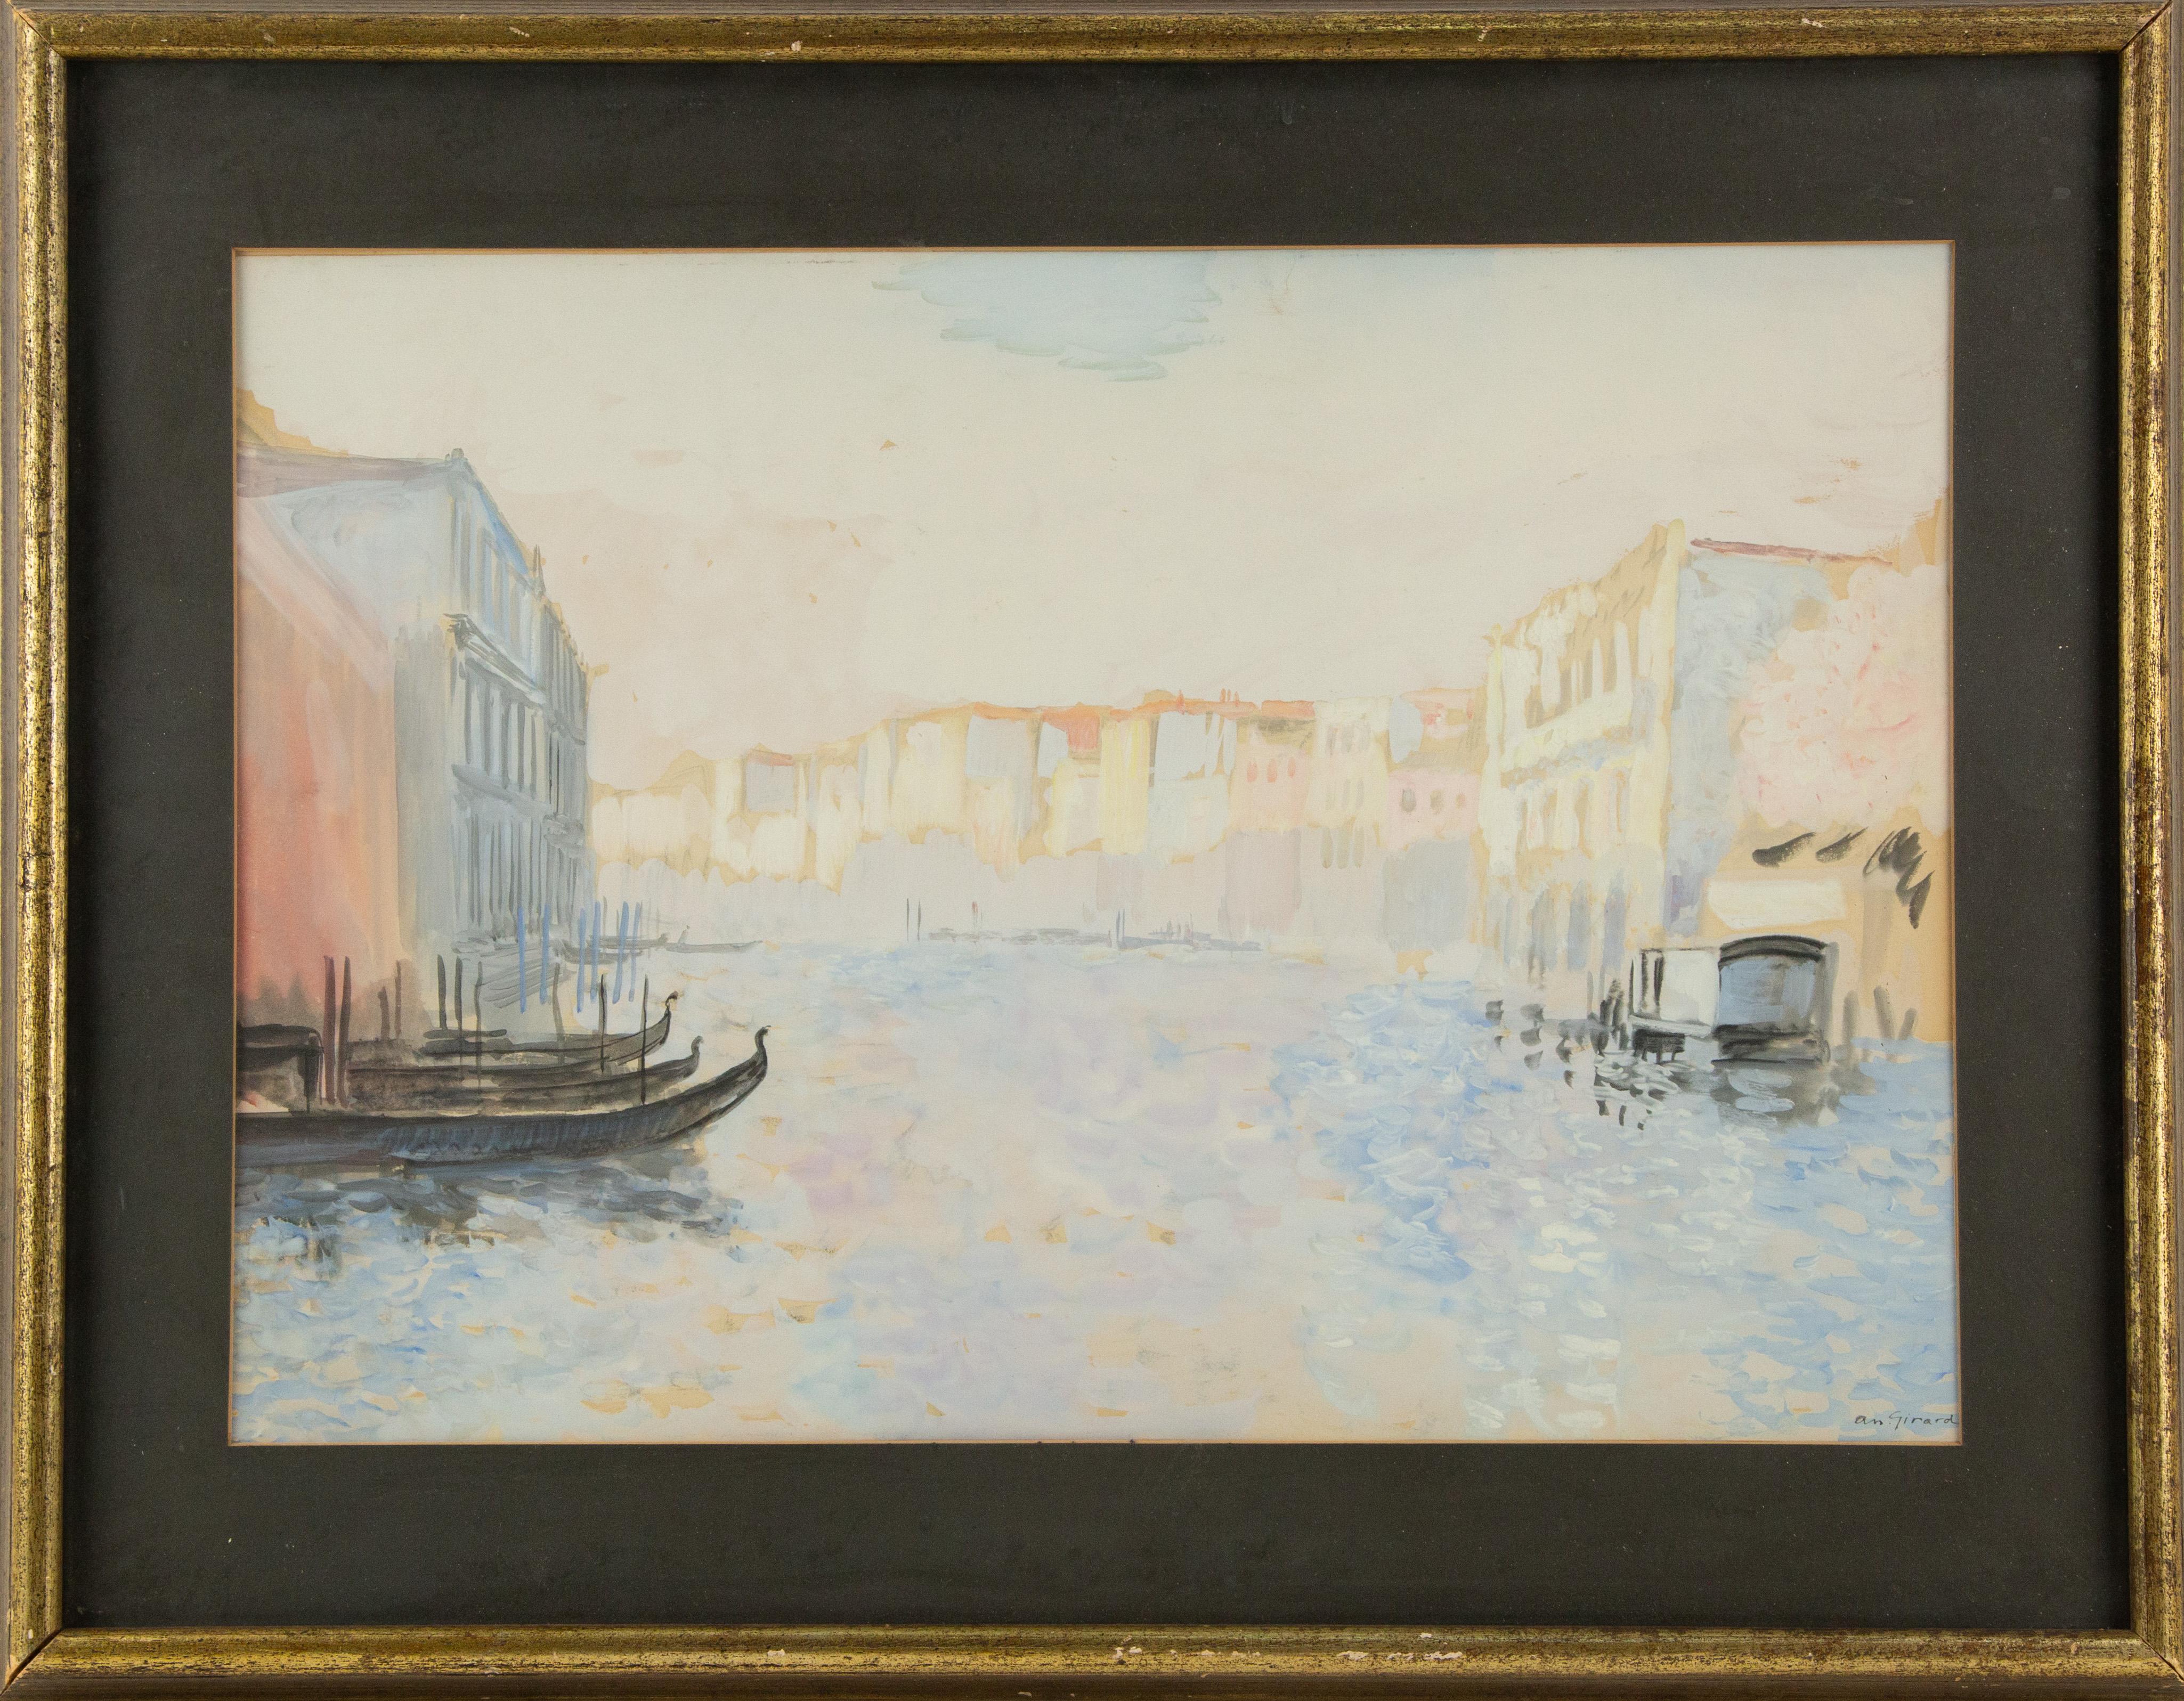 Andrè Girard Landscape Painting - Andre Girard (1901 - 1968) New York / France Watercolor "Venice Impression"